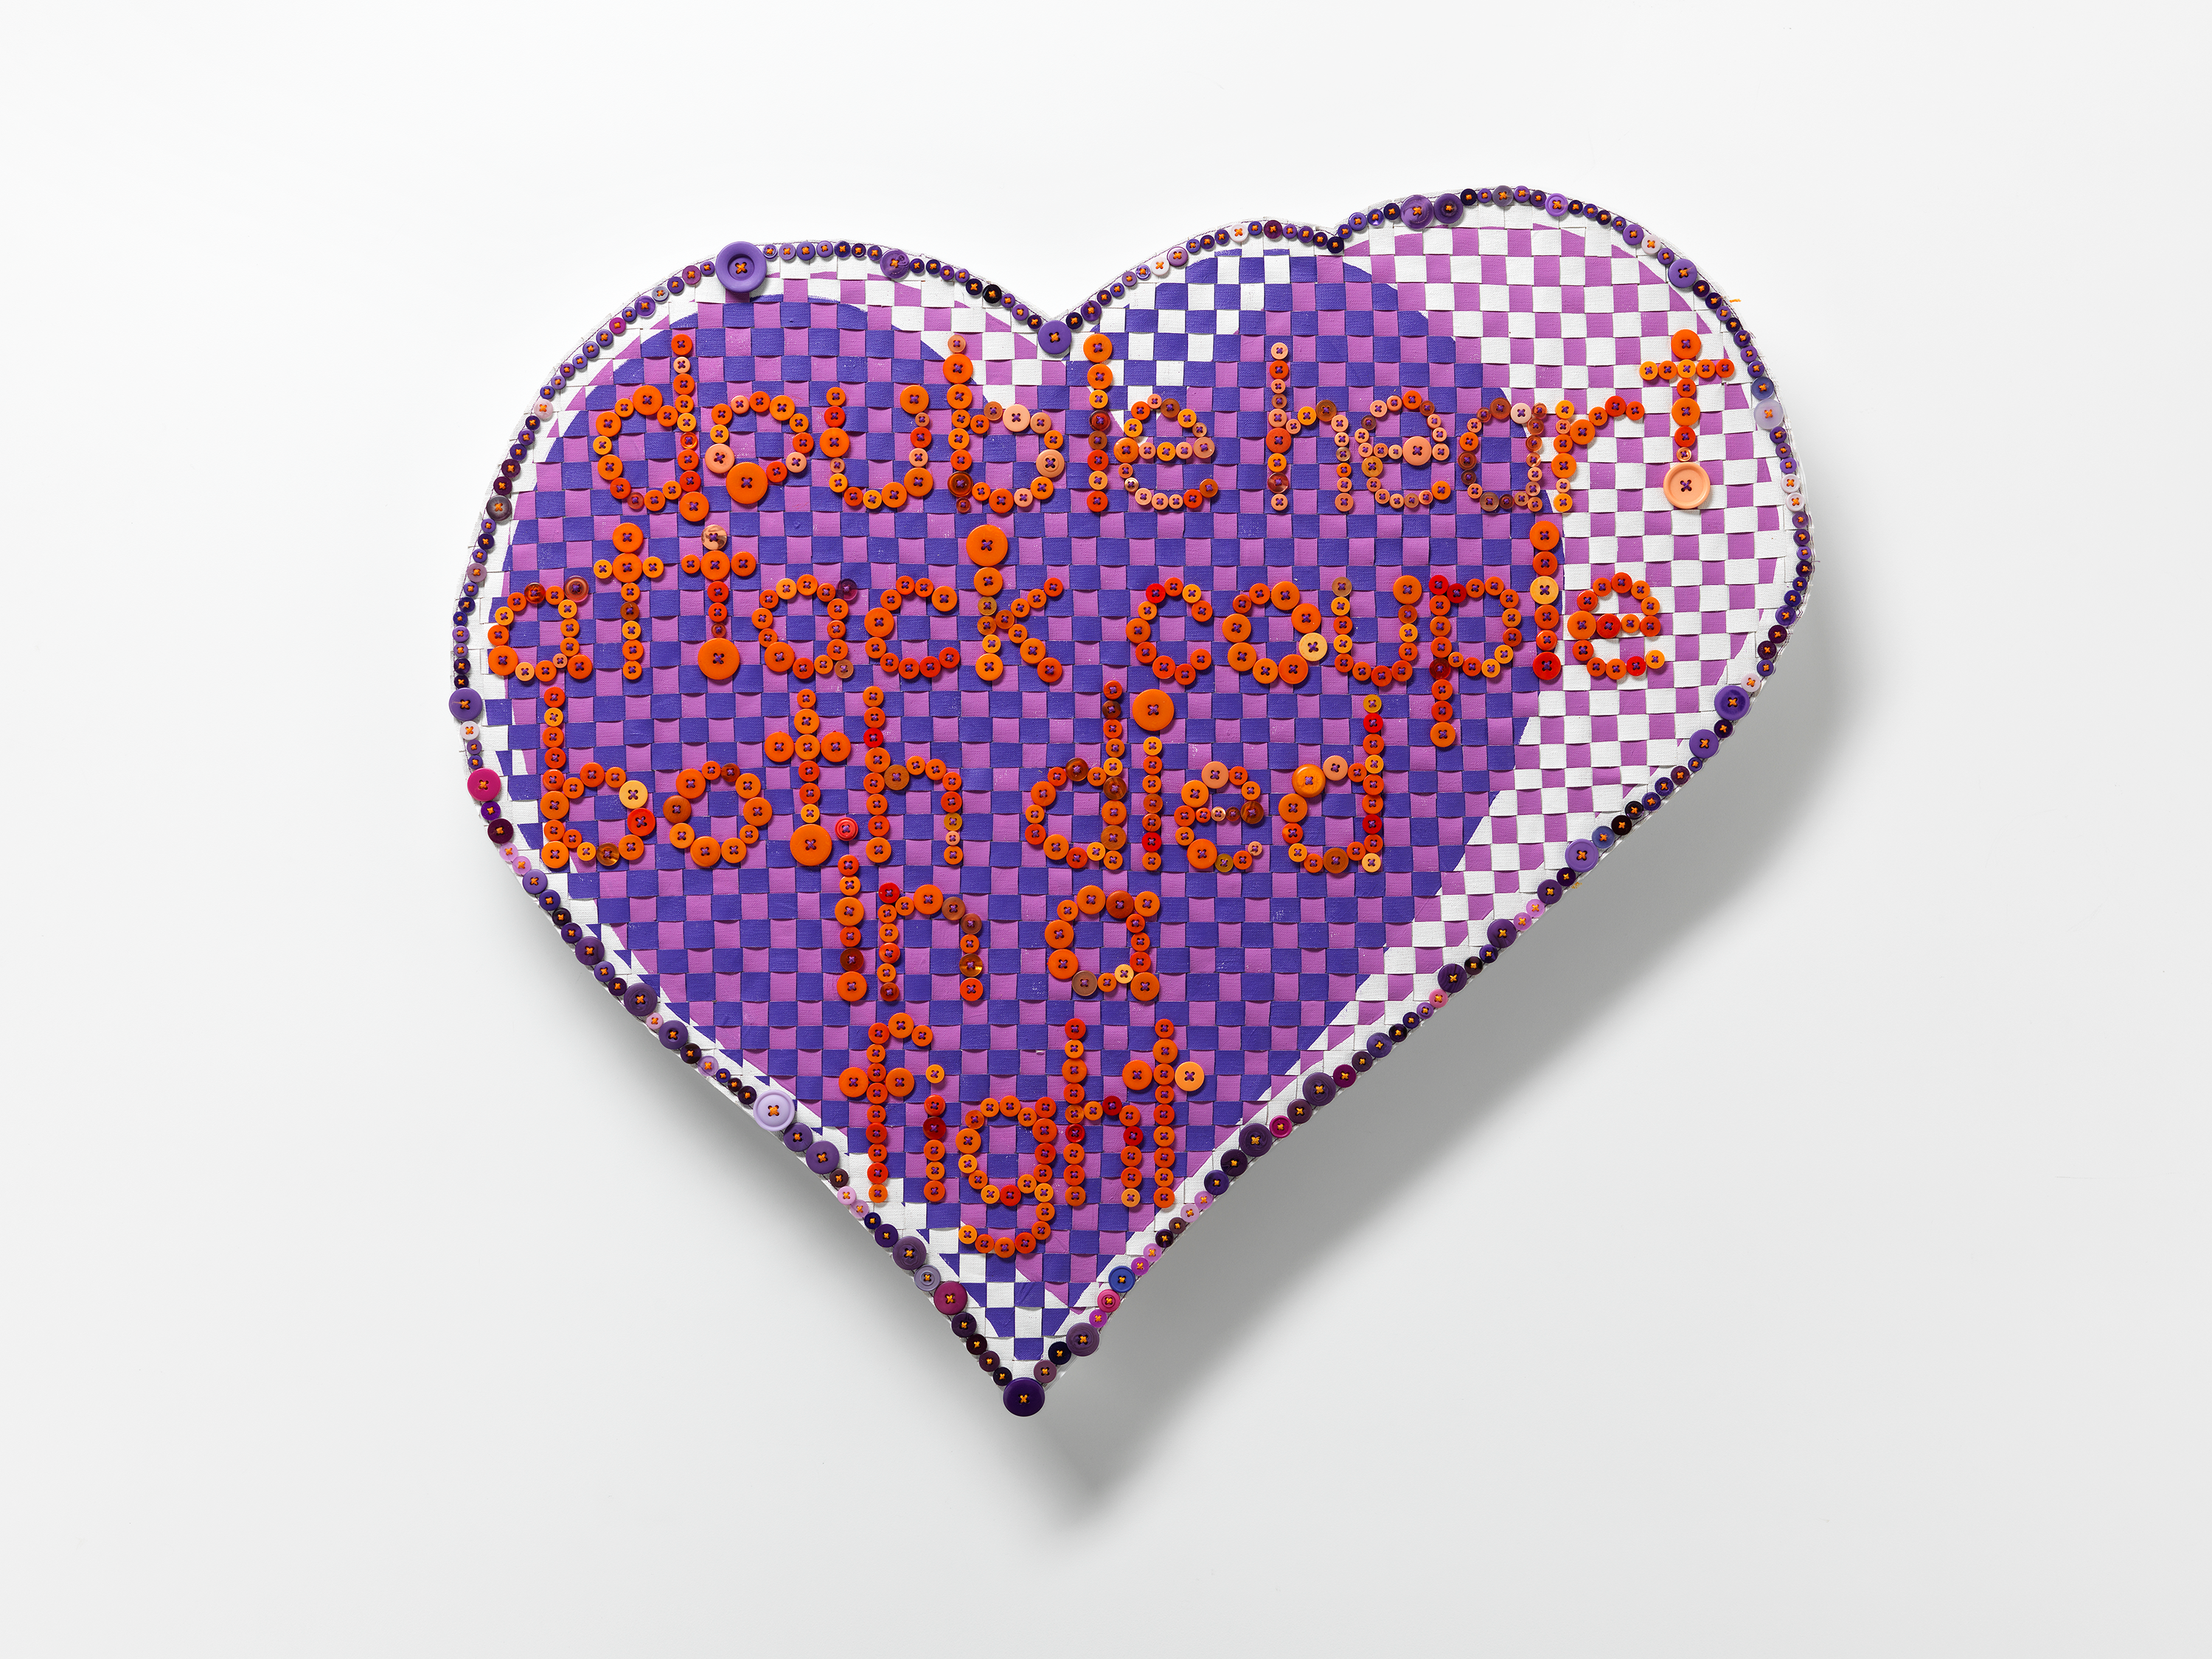 Troy-Anthony BAYLIS, 'Two Hearts (Prince)' 2022, sliced and rewoven acrylic on linen, embroidery cotton, buttons. Courtesy of the artist. Photo: Grant Hancock.